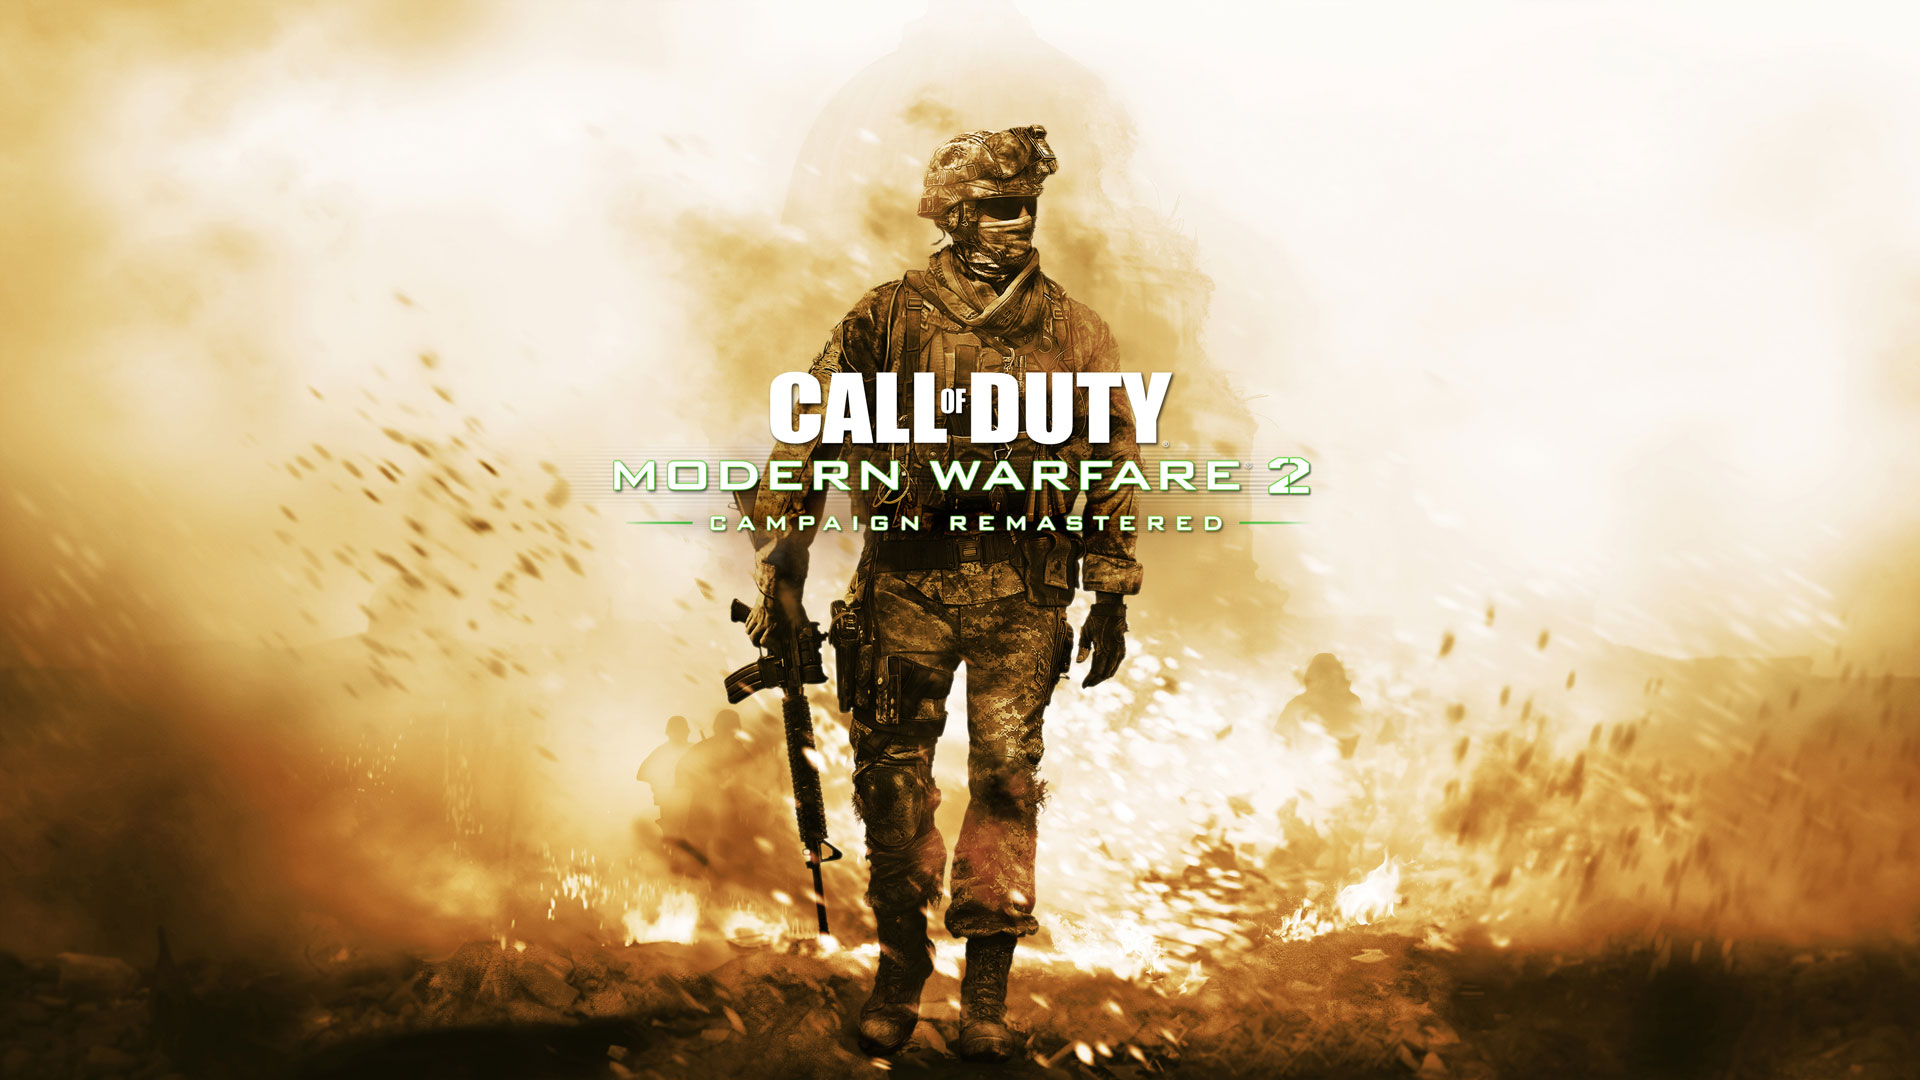 Announcing Call Of Duty®: Modern Warfare® 2 Campaign Remastered Featuring The UDT Classic Ghost Bundle For Instant Access In Call Of Duty: Modern Warfare Includ Ing Call Of Duty: Warzone